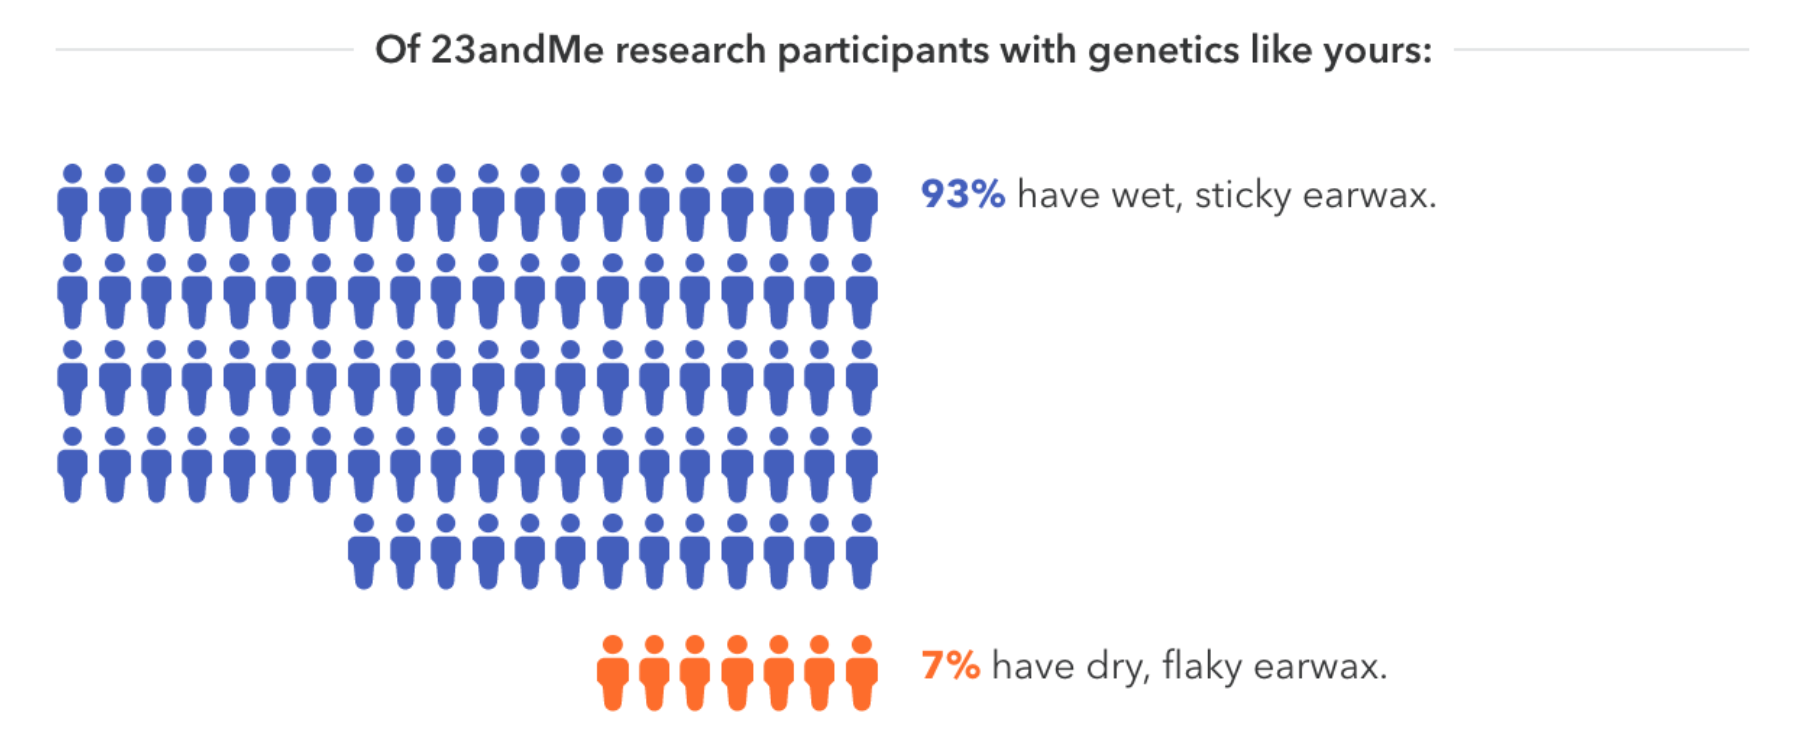 93% of 23andMe research participants have wet, sticky earwax in this sample report